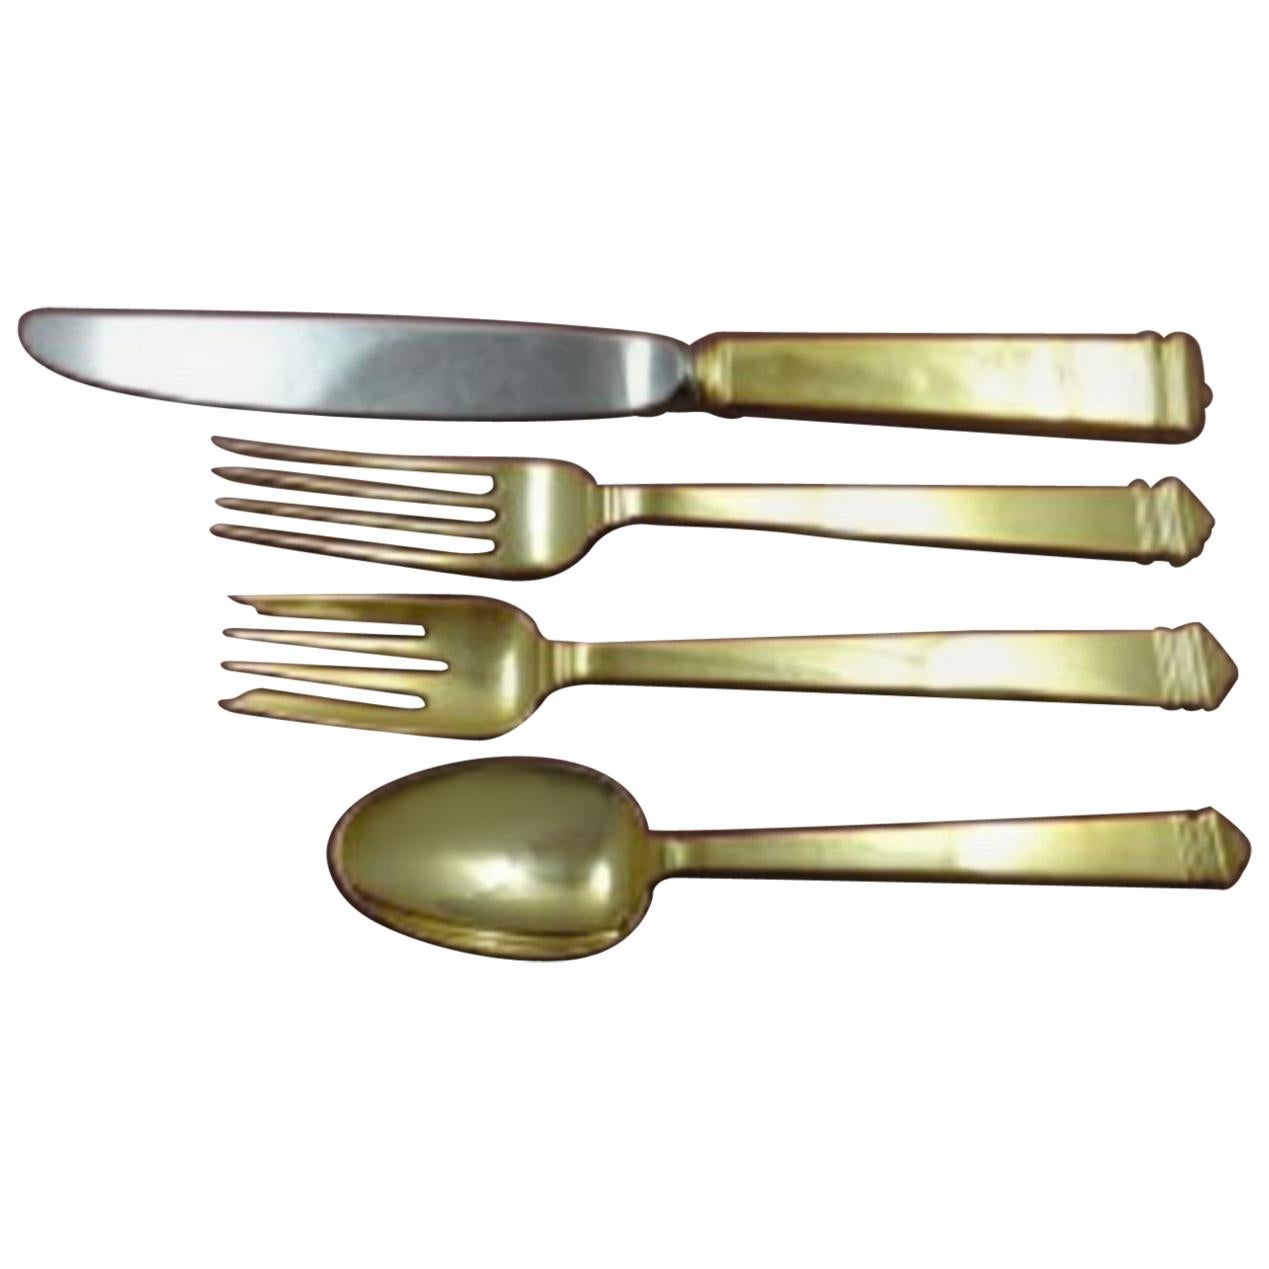 Hampton Vermeil by Tiffany Sterling Silver Regular Size Place Setting's' 4-Piece